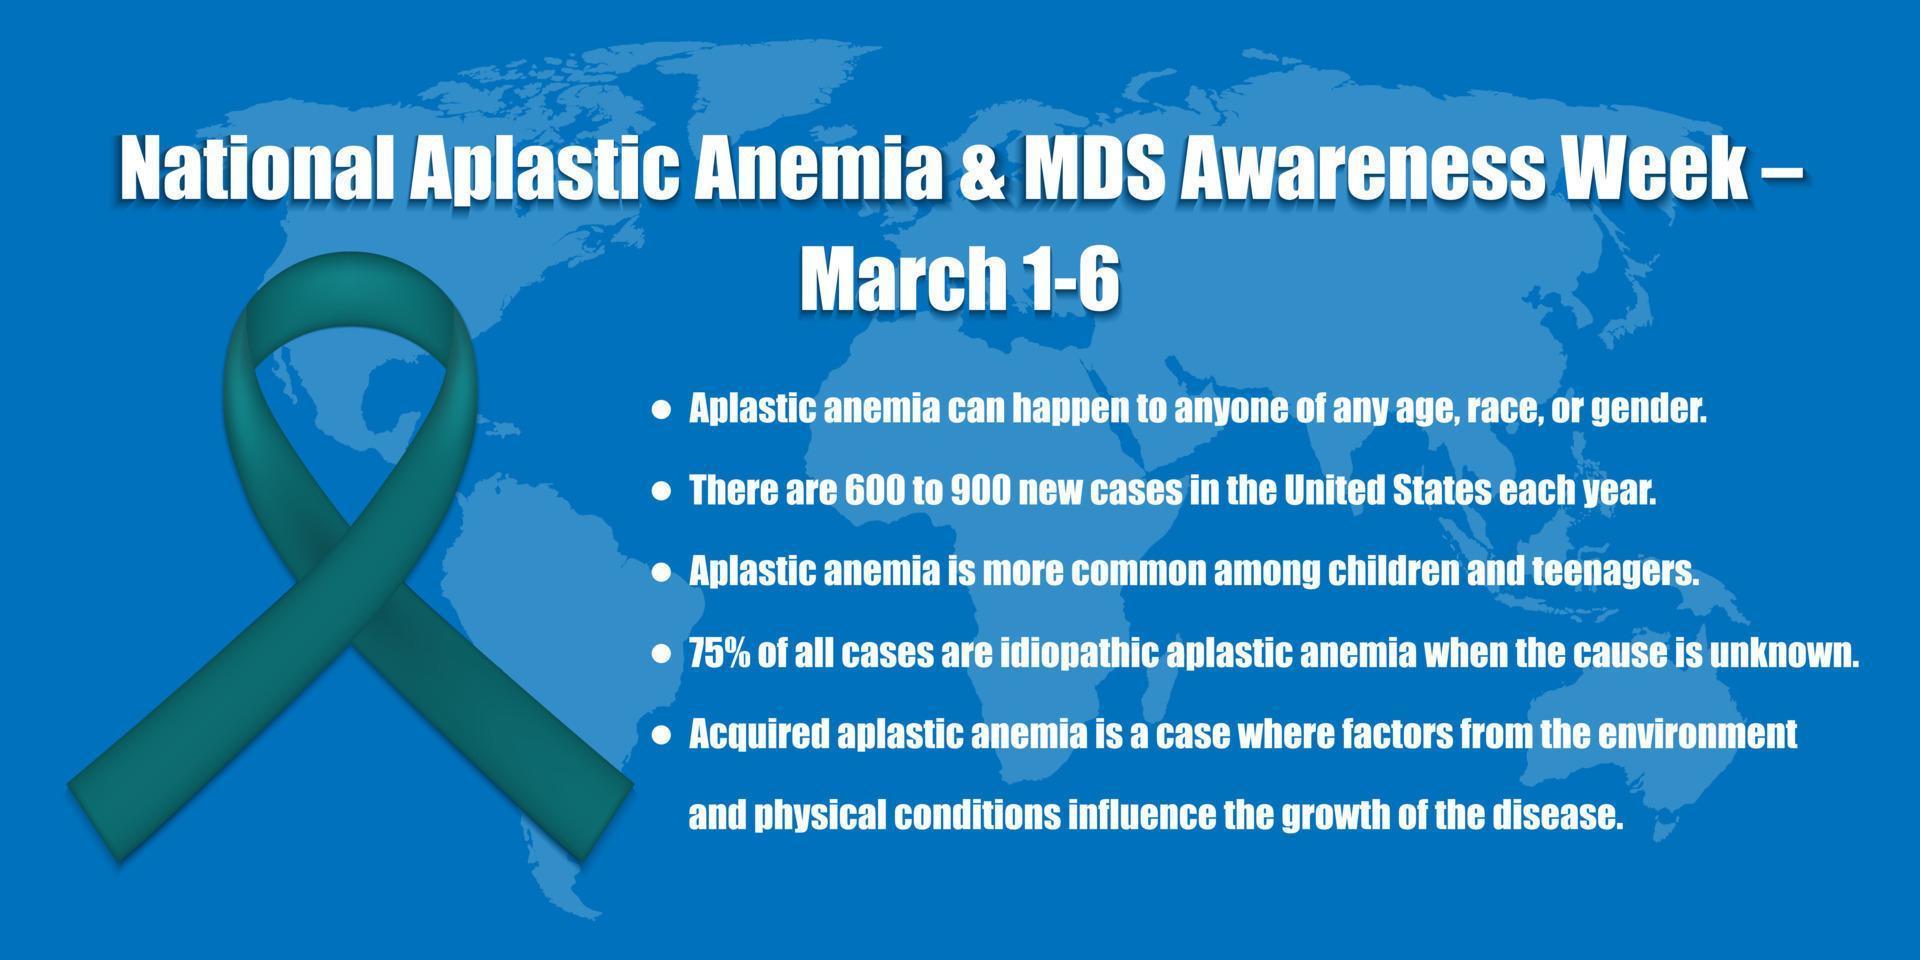 Help raise awareness for National Aplastic Anemia and MDS Awareness Week with our striking banner featuring a green ribbon and a world map on a blue background. Vector illustration.